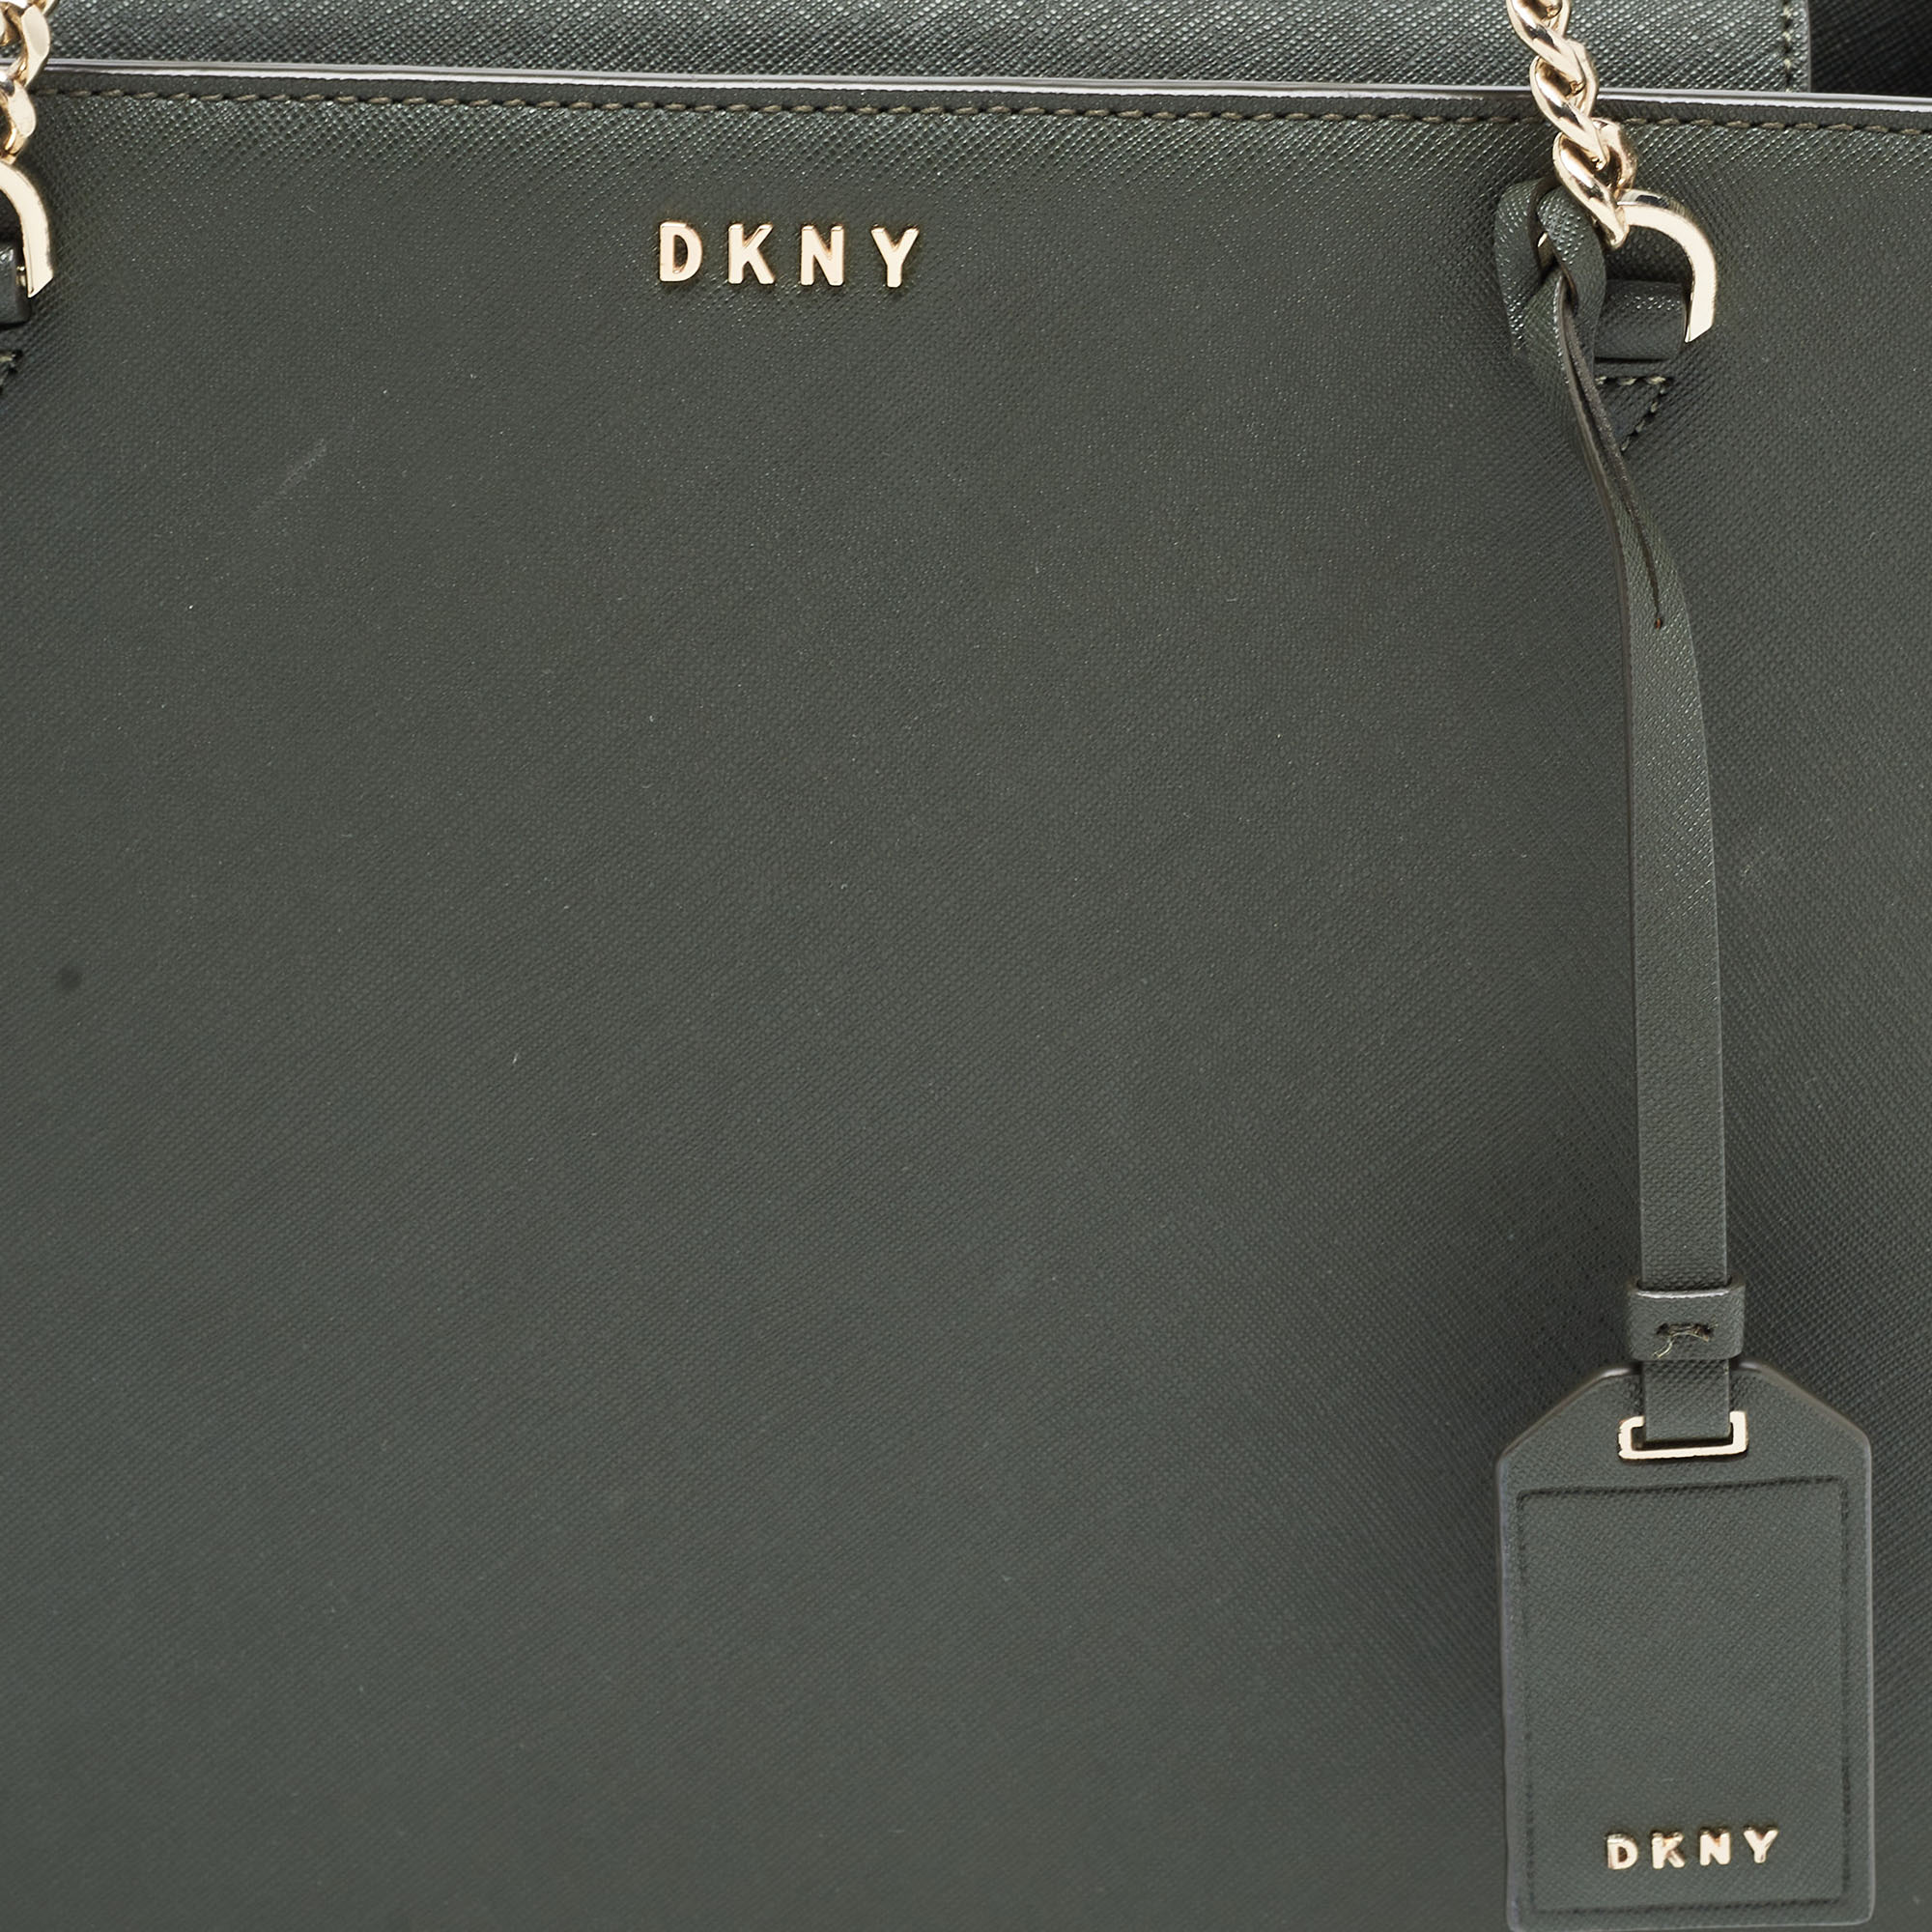 Dkny Green Saffiano Leather Chain Handle Tote